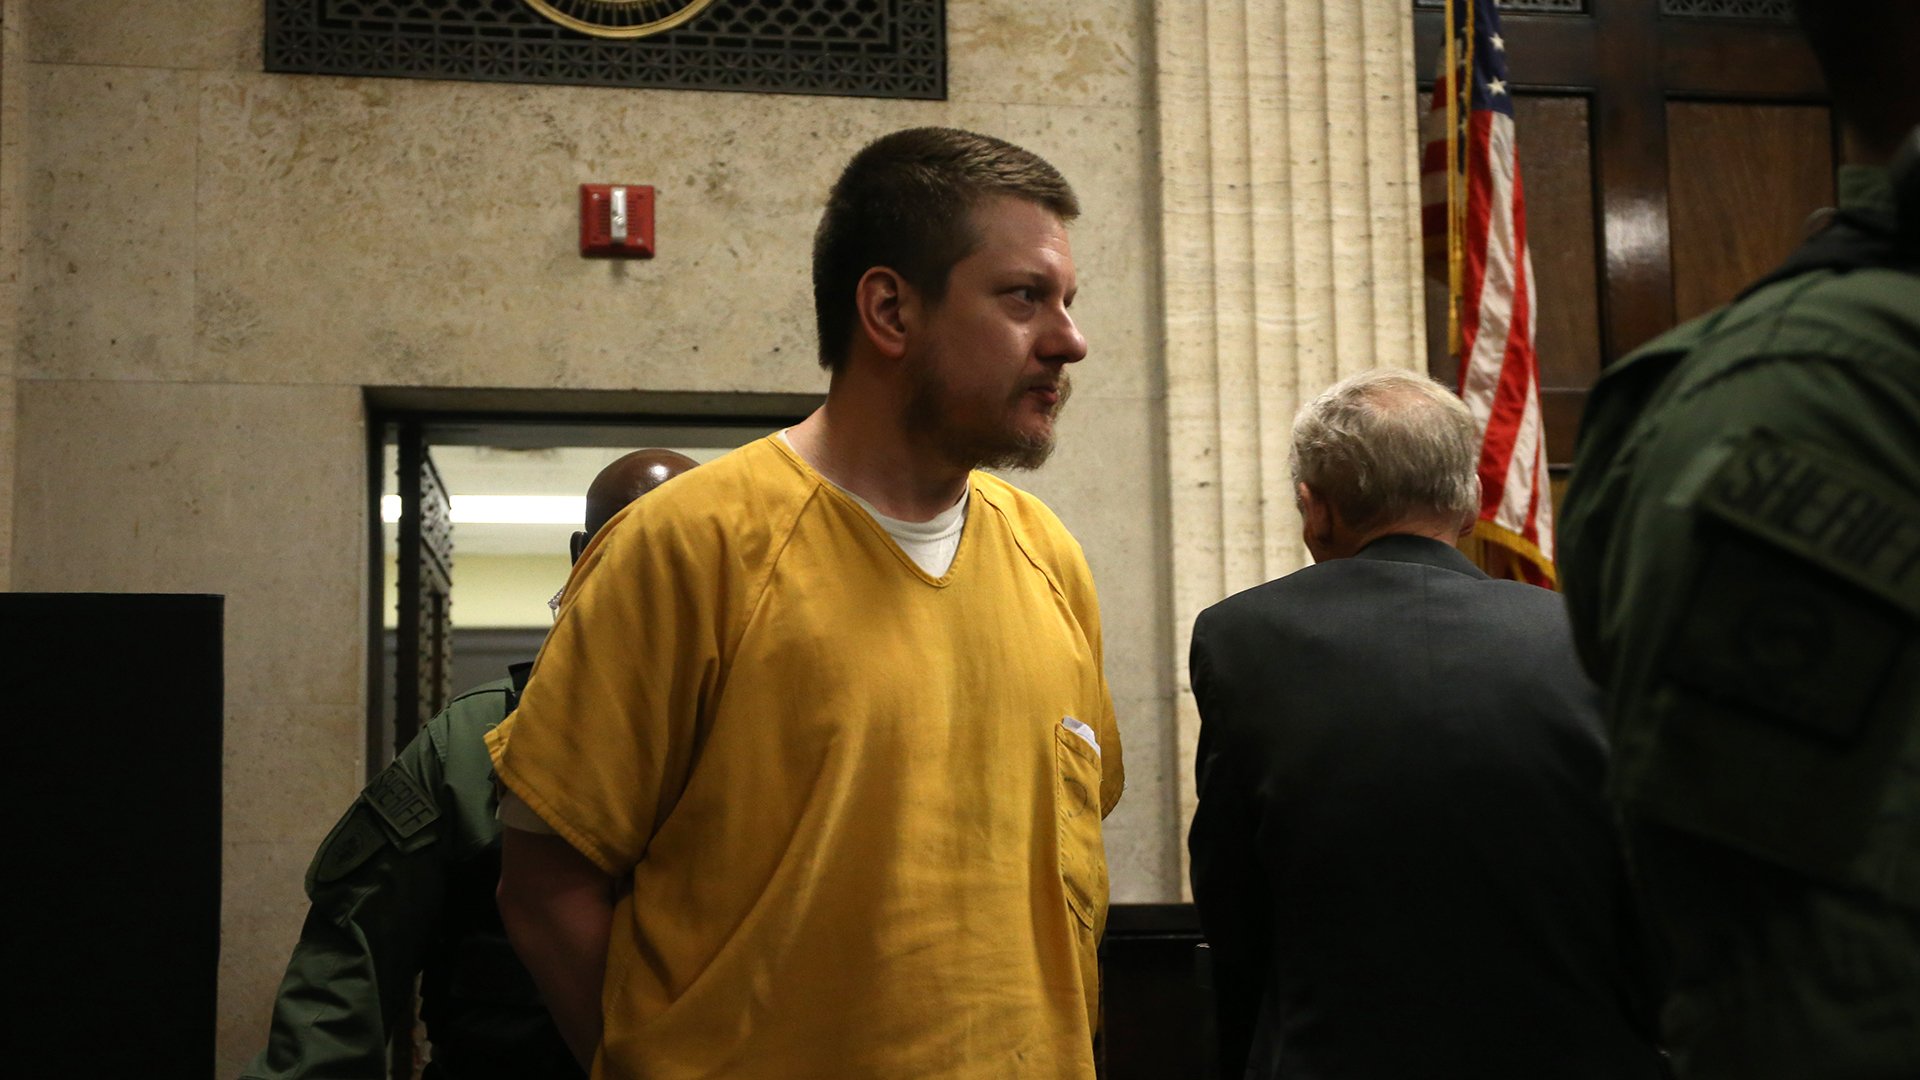 Former Chicago police Officer Jason Van Dyke enters the courtroom for his sentencing hearing at the Leighton Criminal Court Building on Friday, Jan. 18, 2019. (Antonio Perez / Chicago Tribune / Pool)